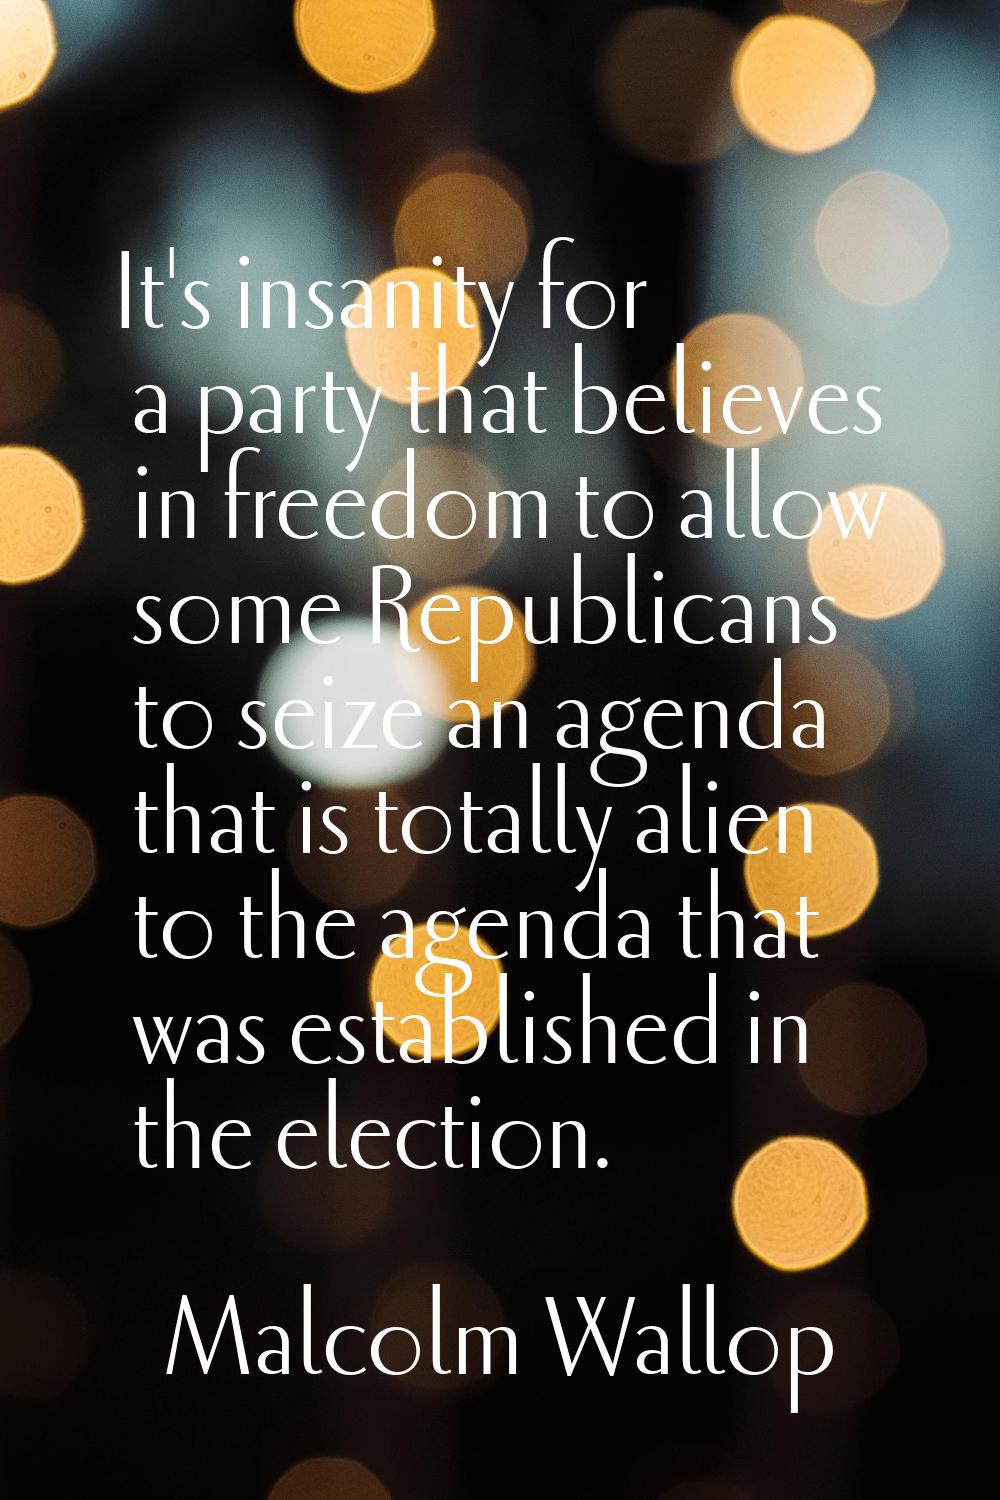 It's insanity for a party that believes in freedom to allow some Republicans to seize an agenda tha